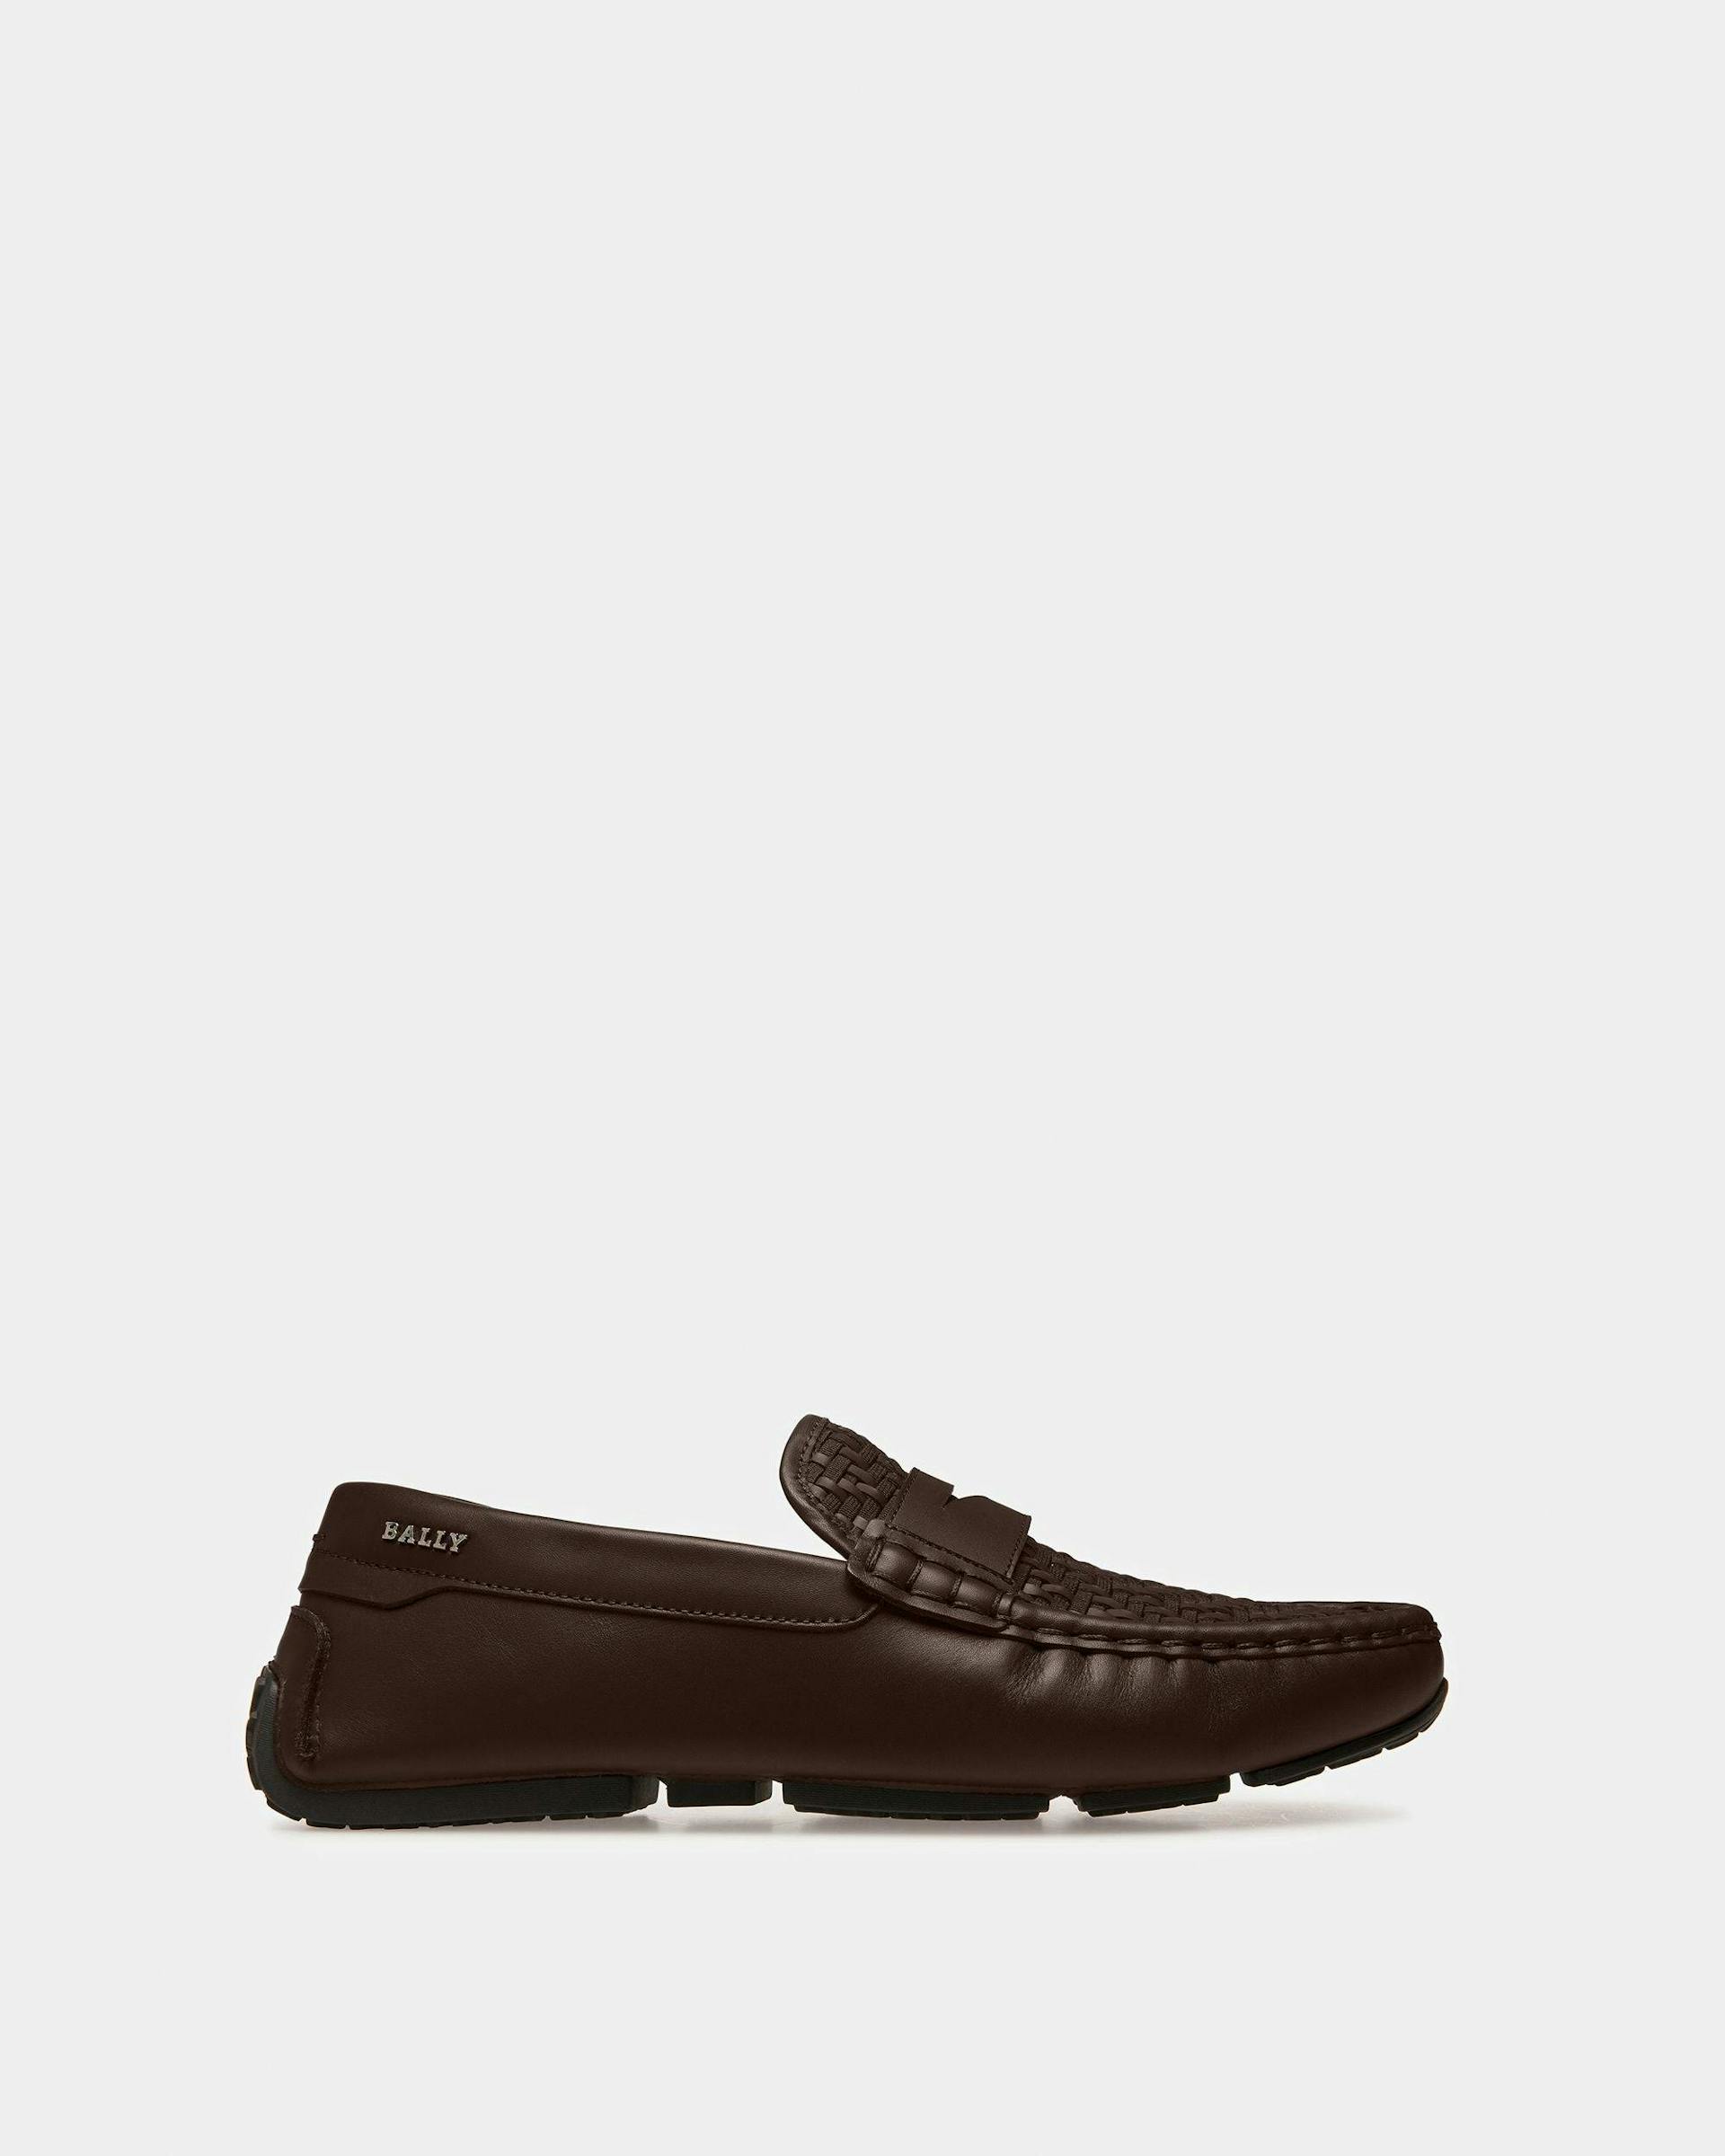 Pilos Leather Drivers In Brown - Men's - Bally - 01